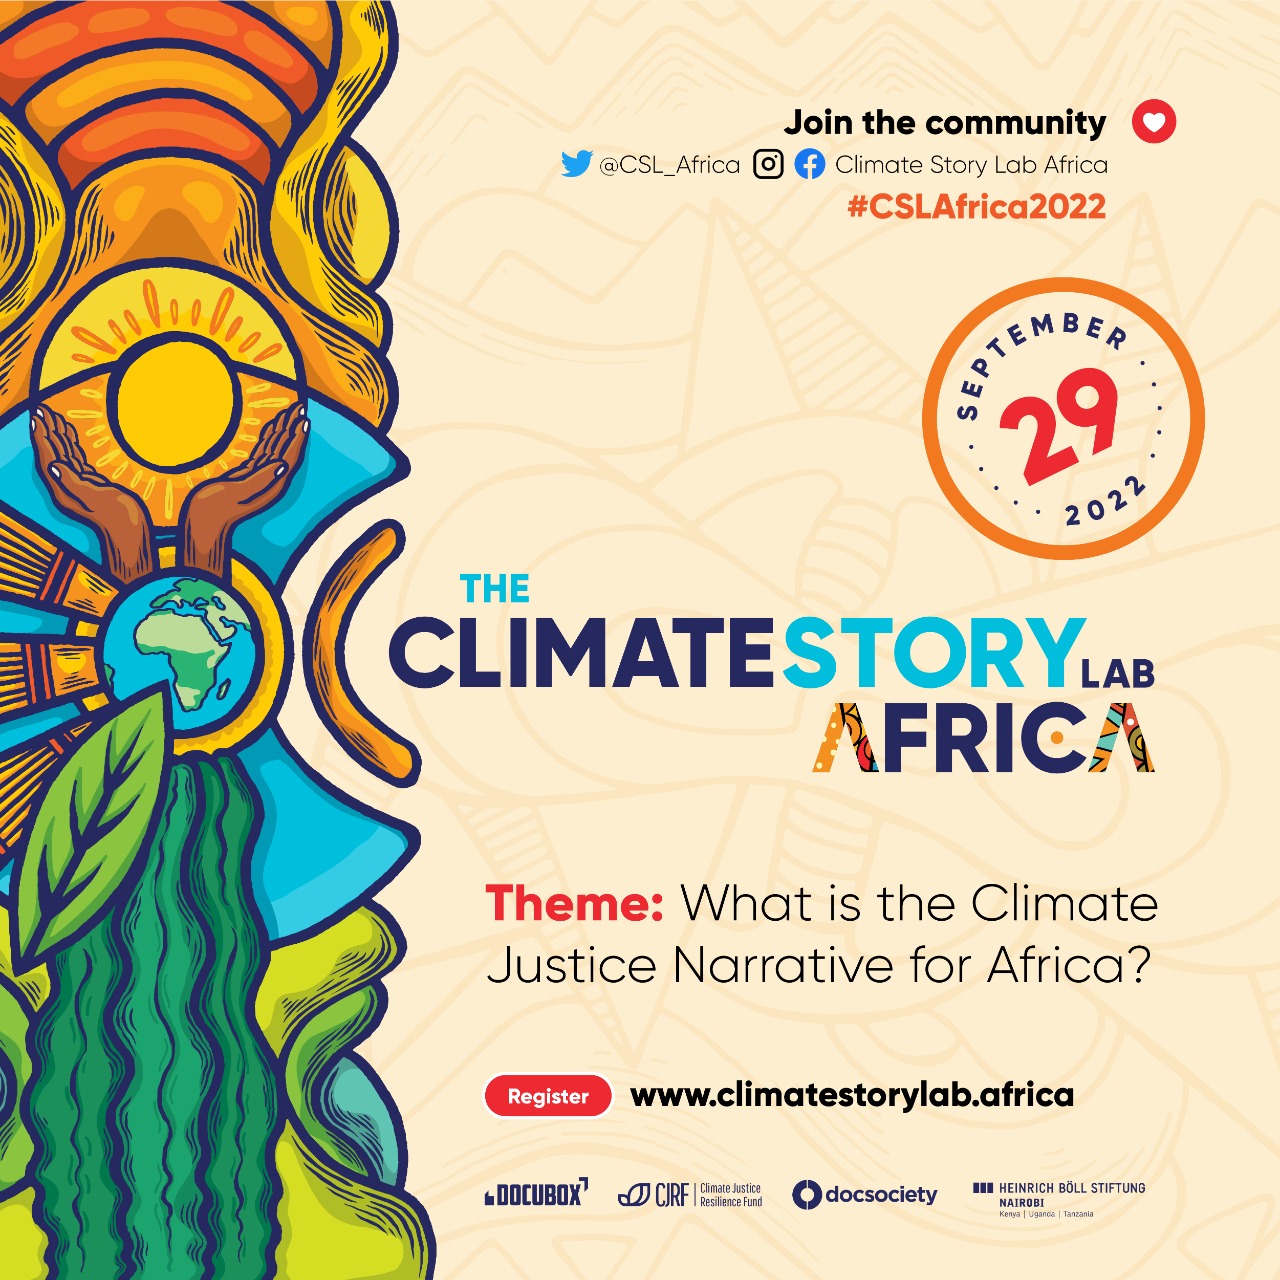 The Climate Story Lab Africa